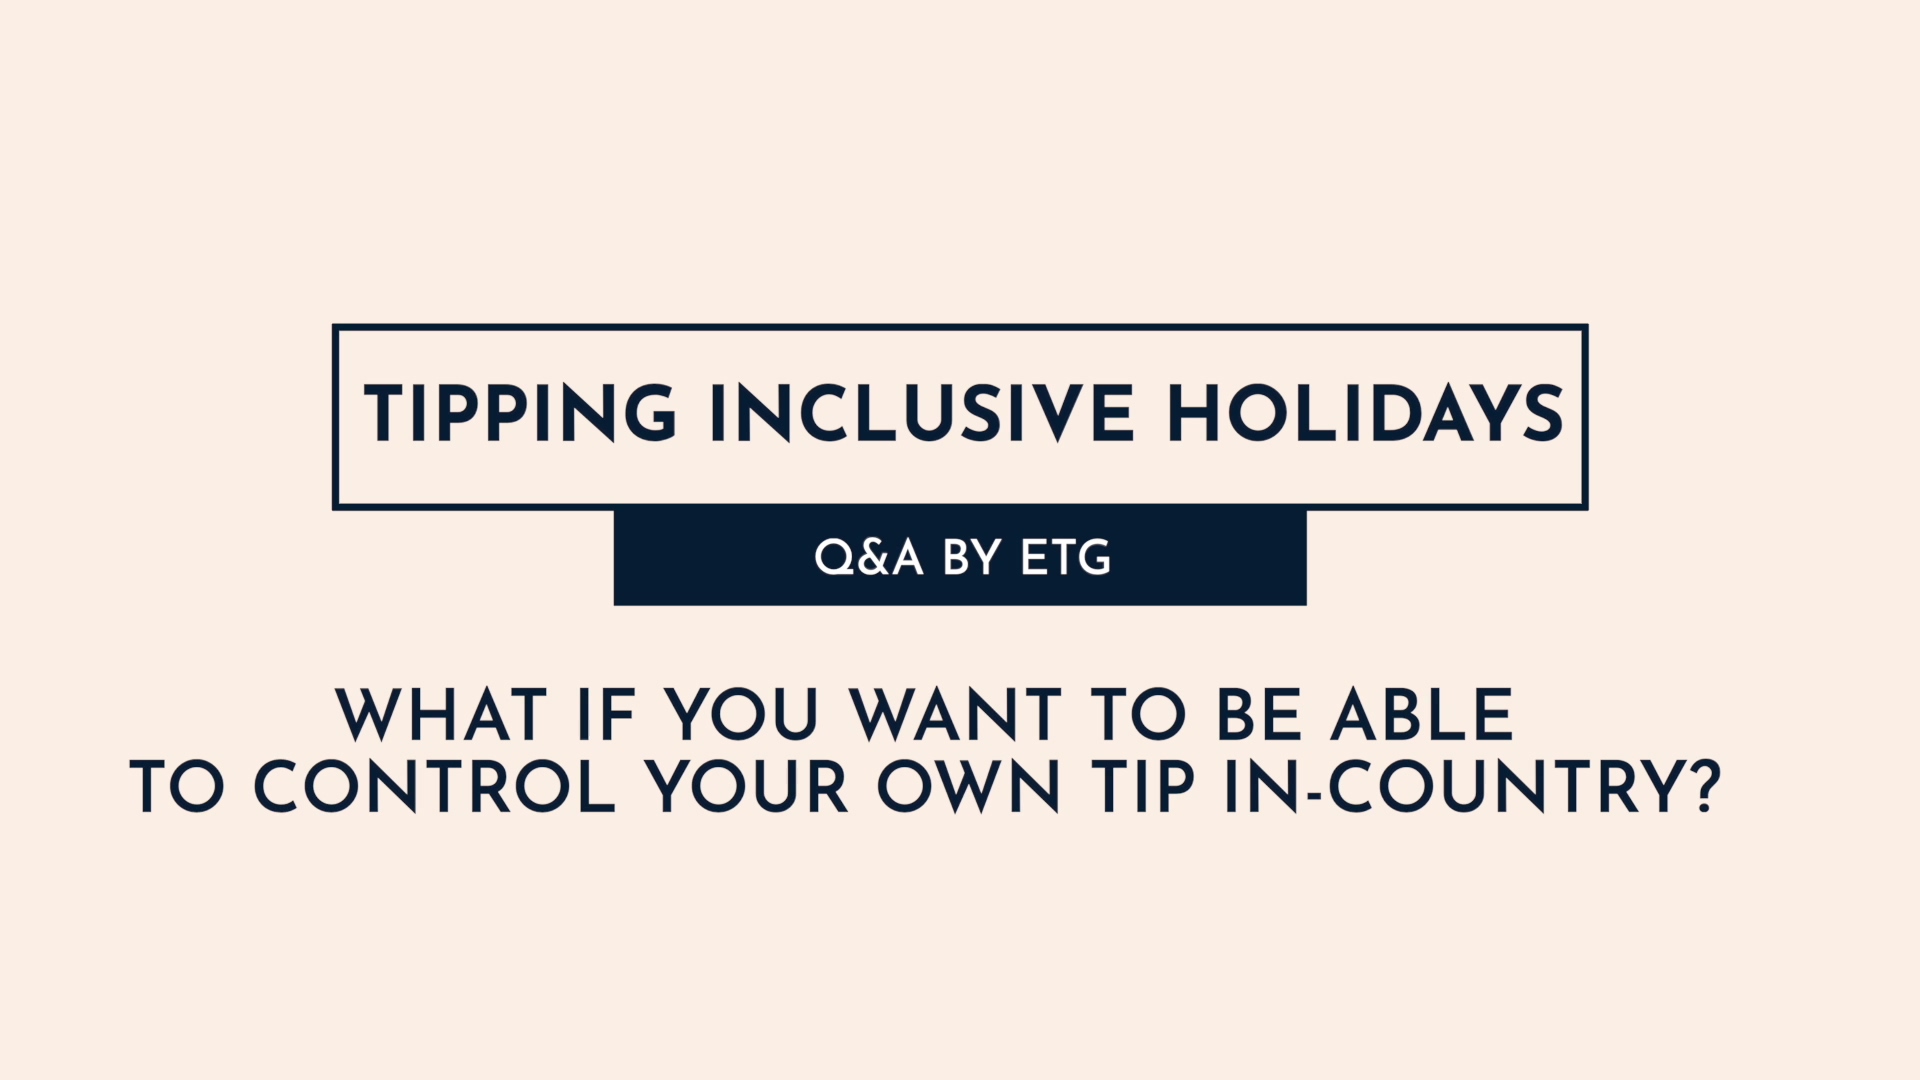 6 - What if you want to control how much you tip on your holiday